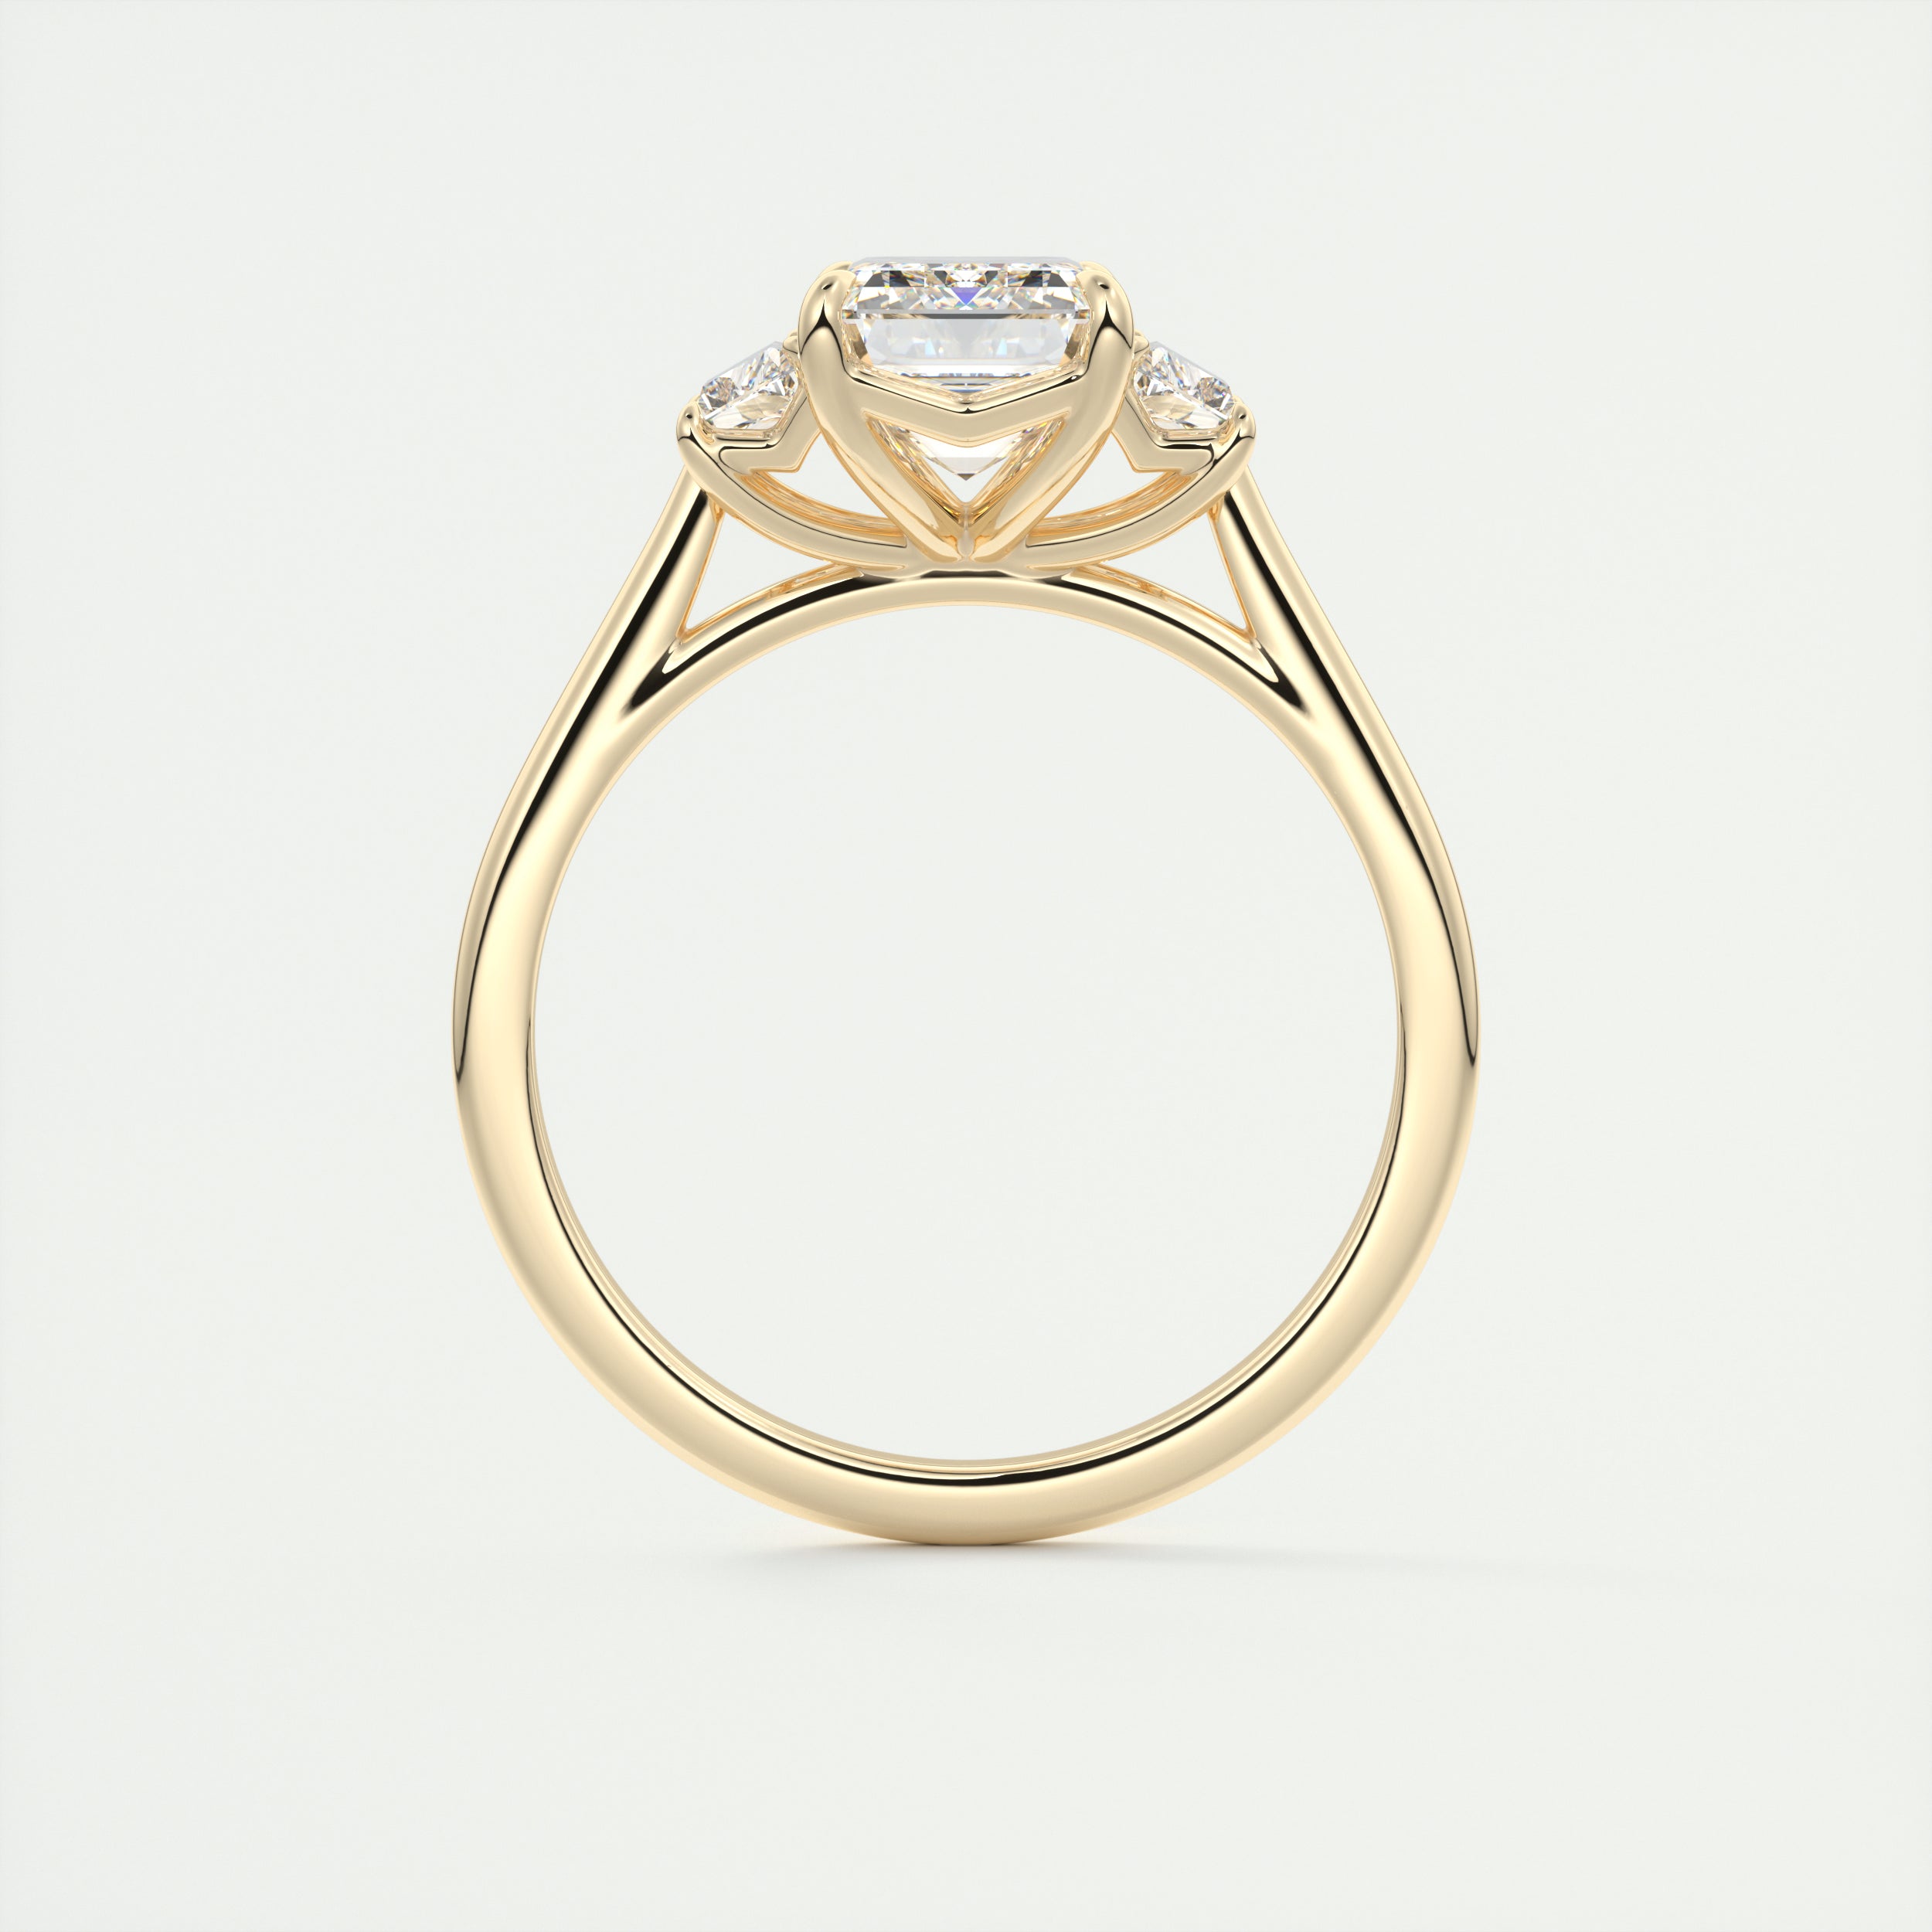 Emerald three stone Frank Darling diamond engagement ring with step cut trapezoid side stones in yellow gold